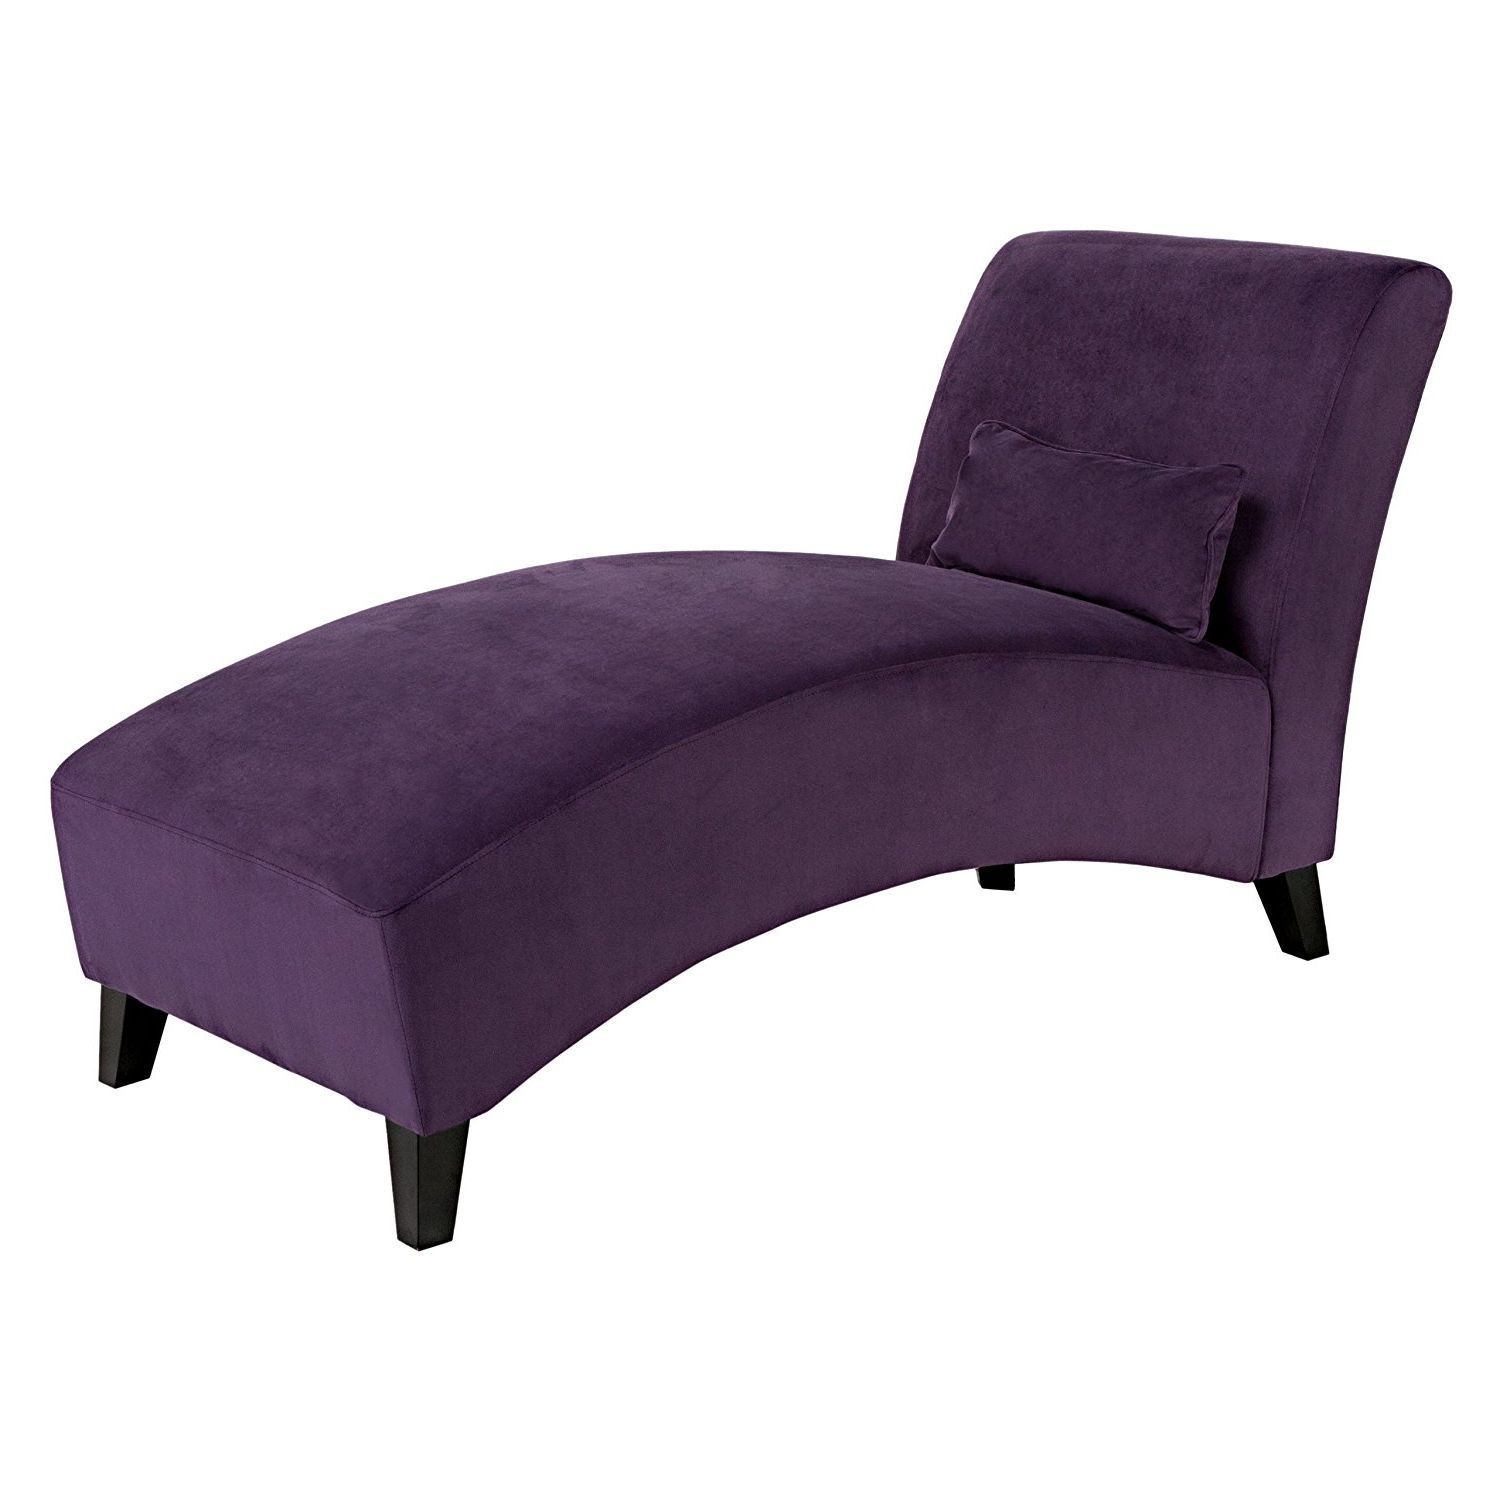 Trendy Amazon: Handy Living Chaise Lounge Chair, Purple: Kitchen & Dining Pertaining To Velvet Chaise Lounges (View 12 of 15)